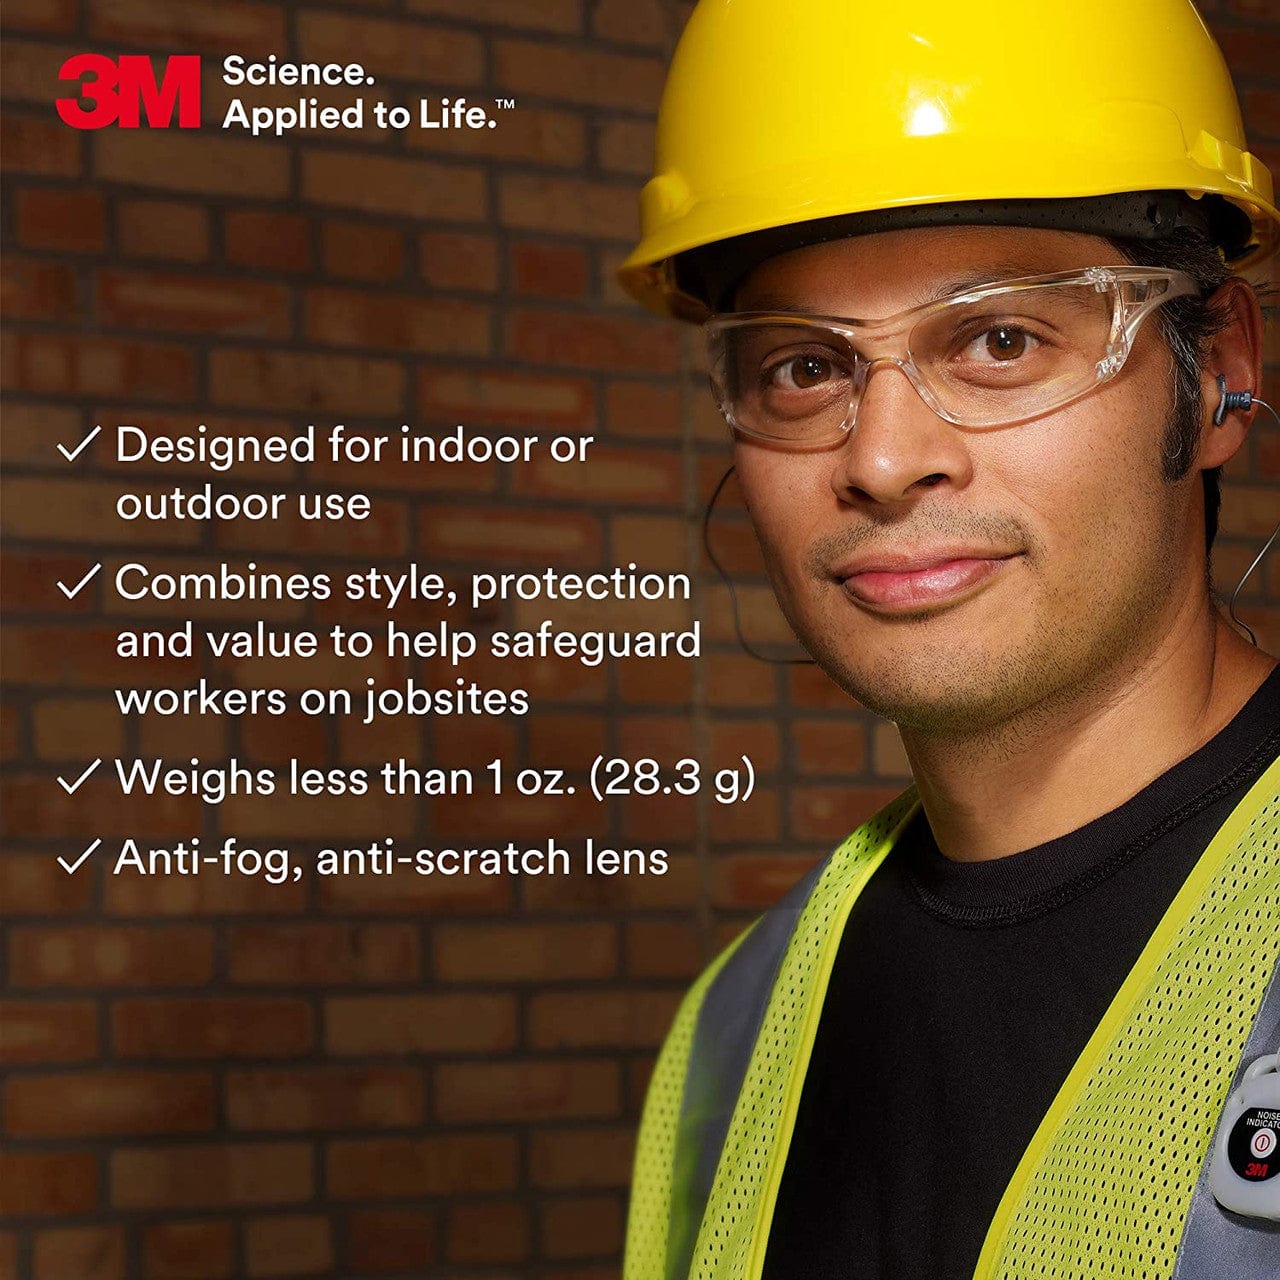 3M Virtua AP Safety Glasses with Clear Lens 11819 Specs